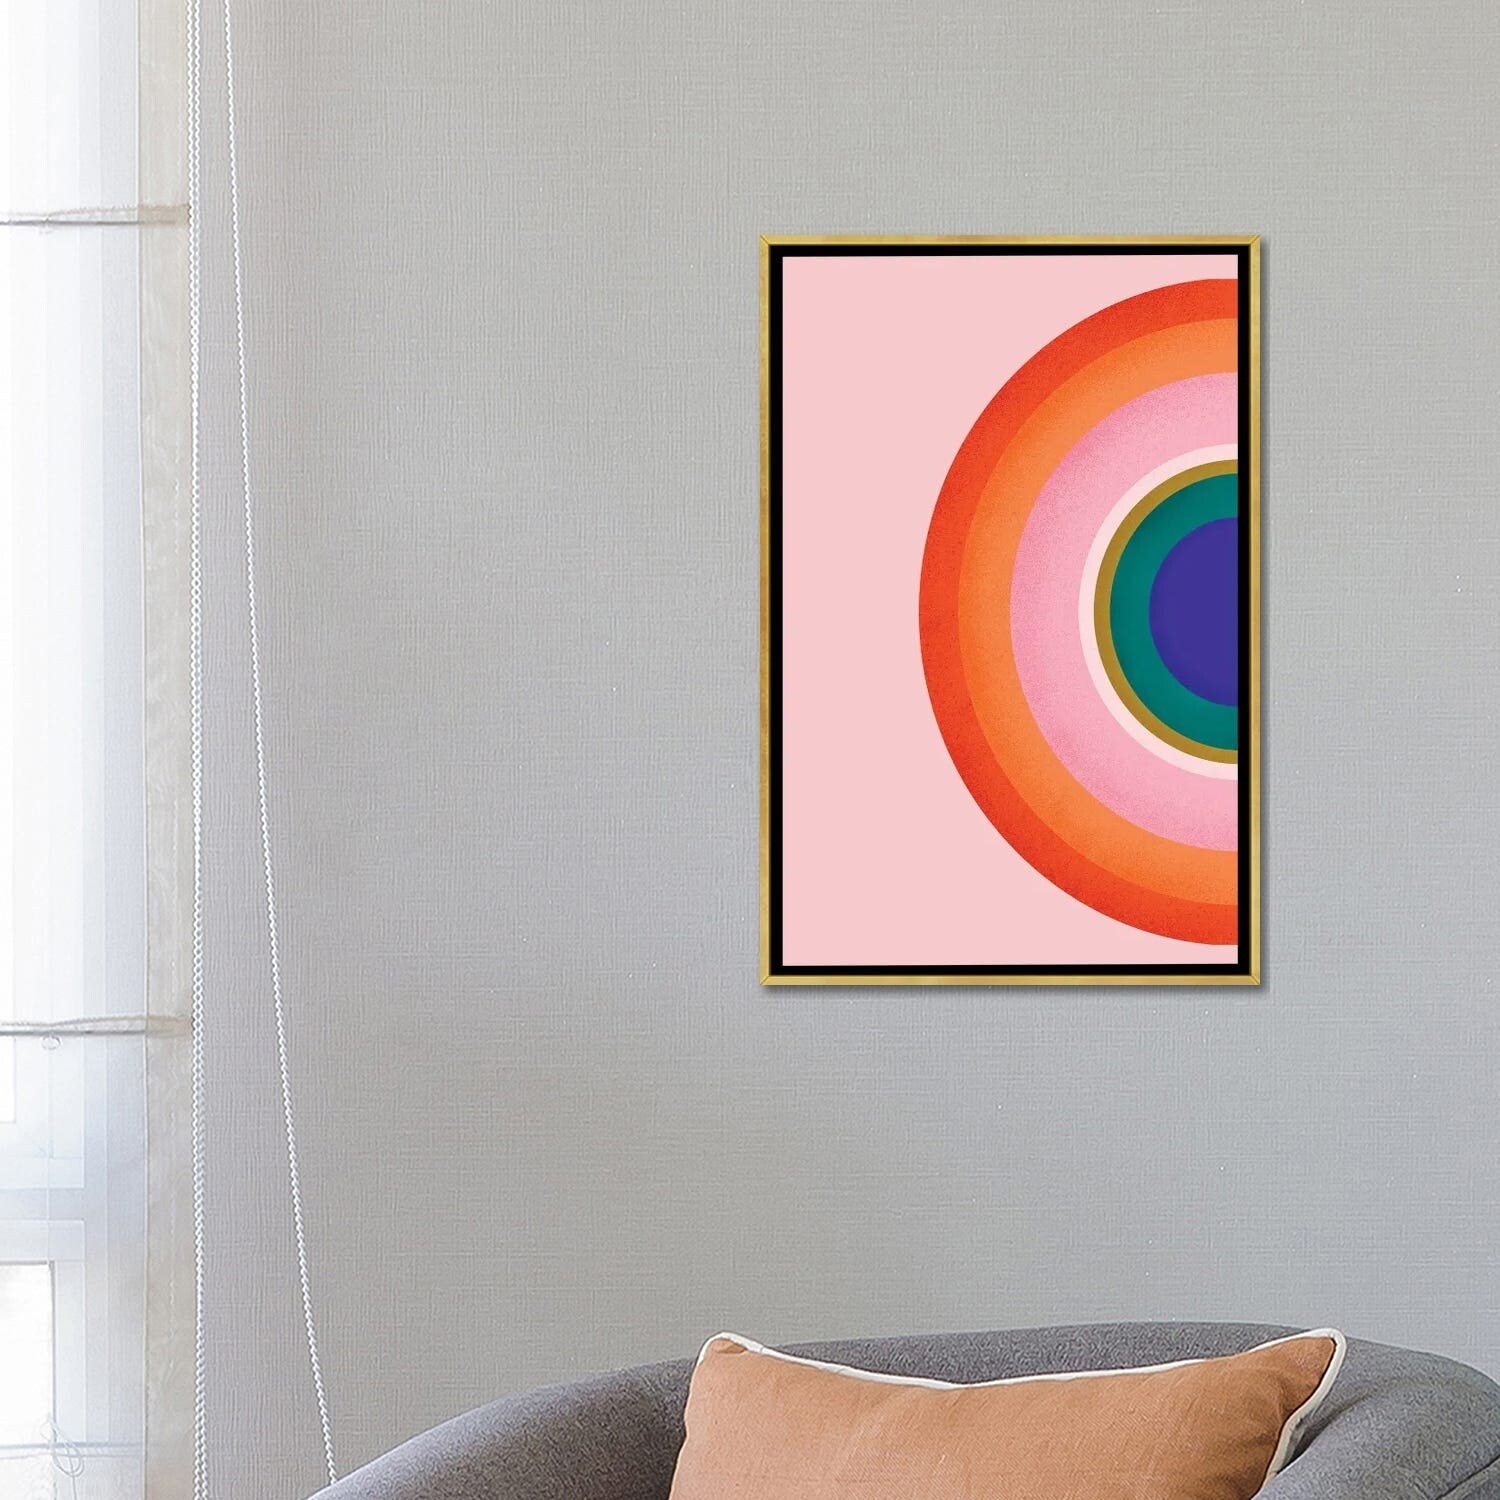 Framed Canvas Art (Gold Floating Frame) - Colorful Half Circle by Show Me Mars (styles > Abstract art) - 26x18 in